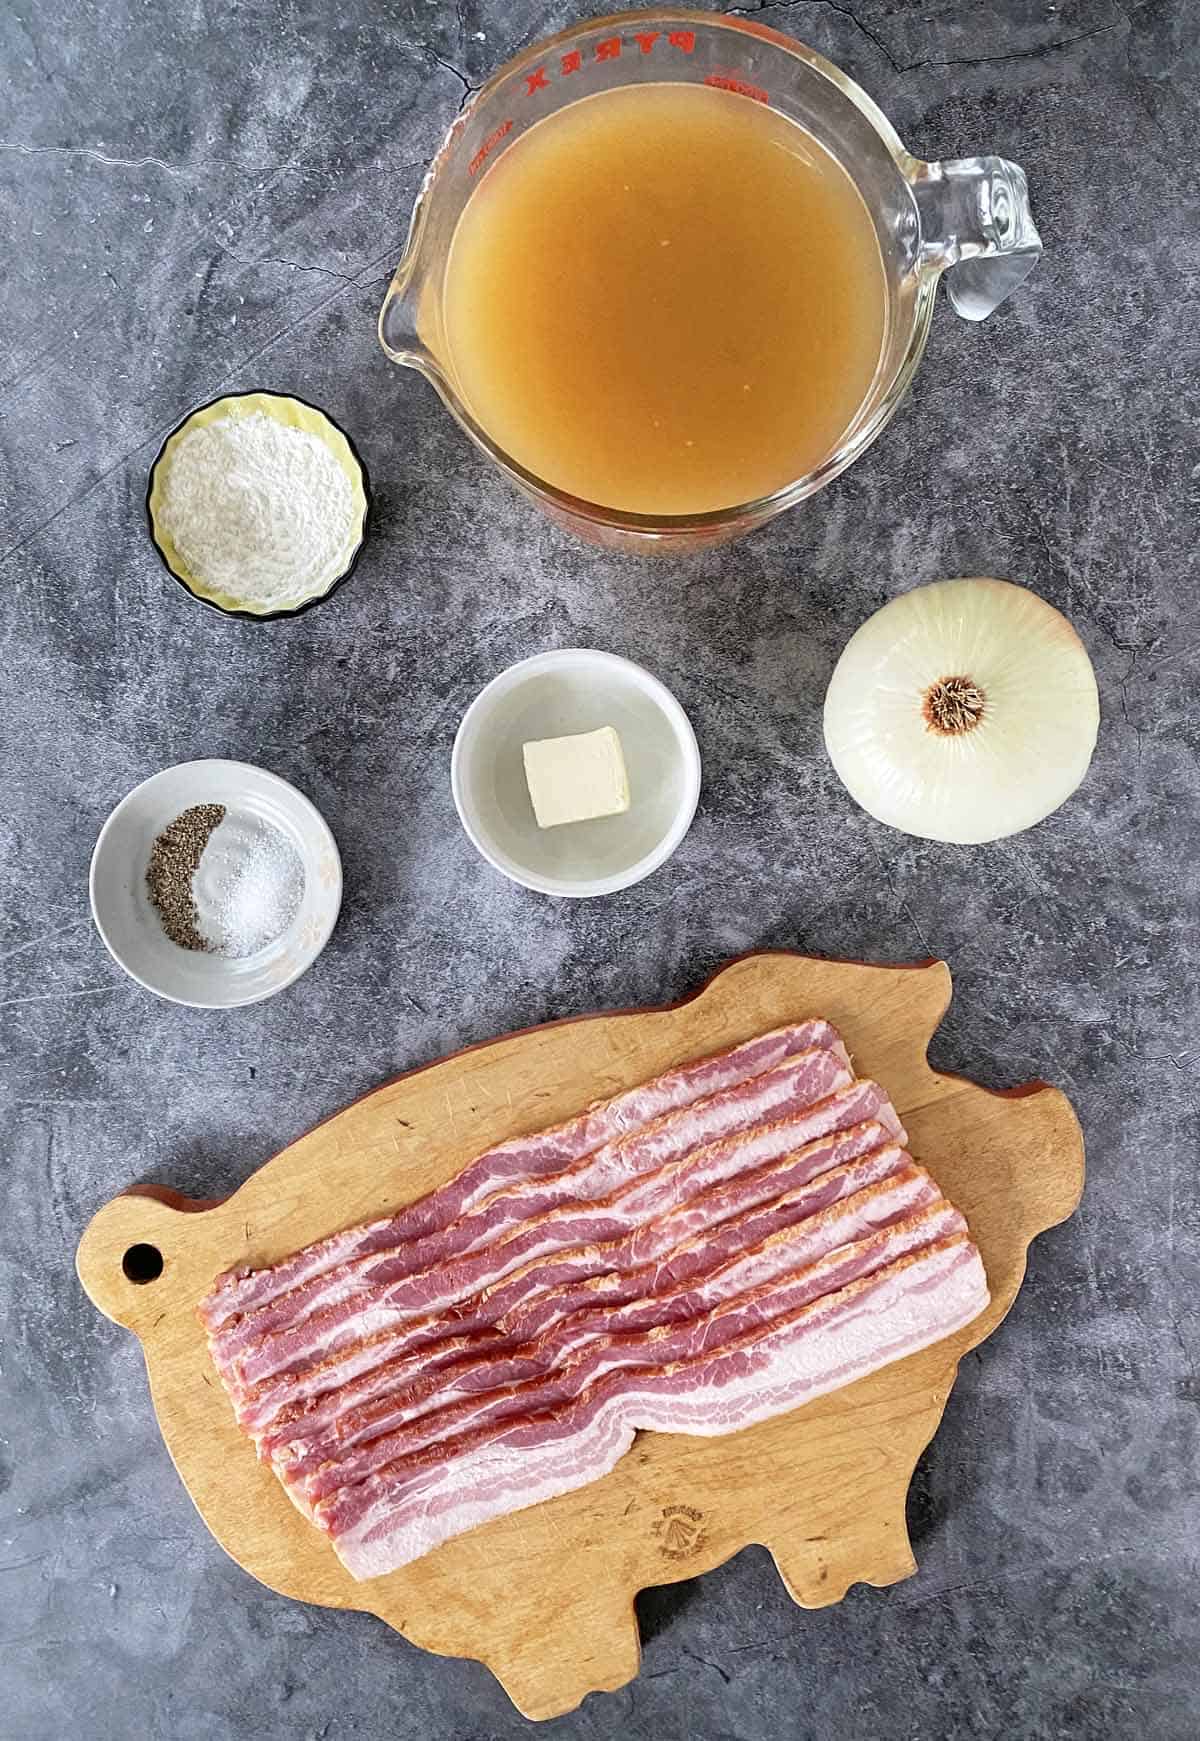 Broth, flour, butter, onion, salt and pepper and a pound of uncooked bacon on a cutting board.